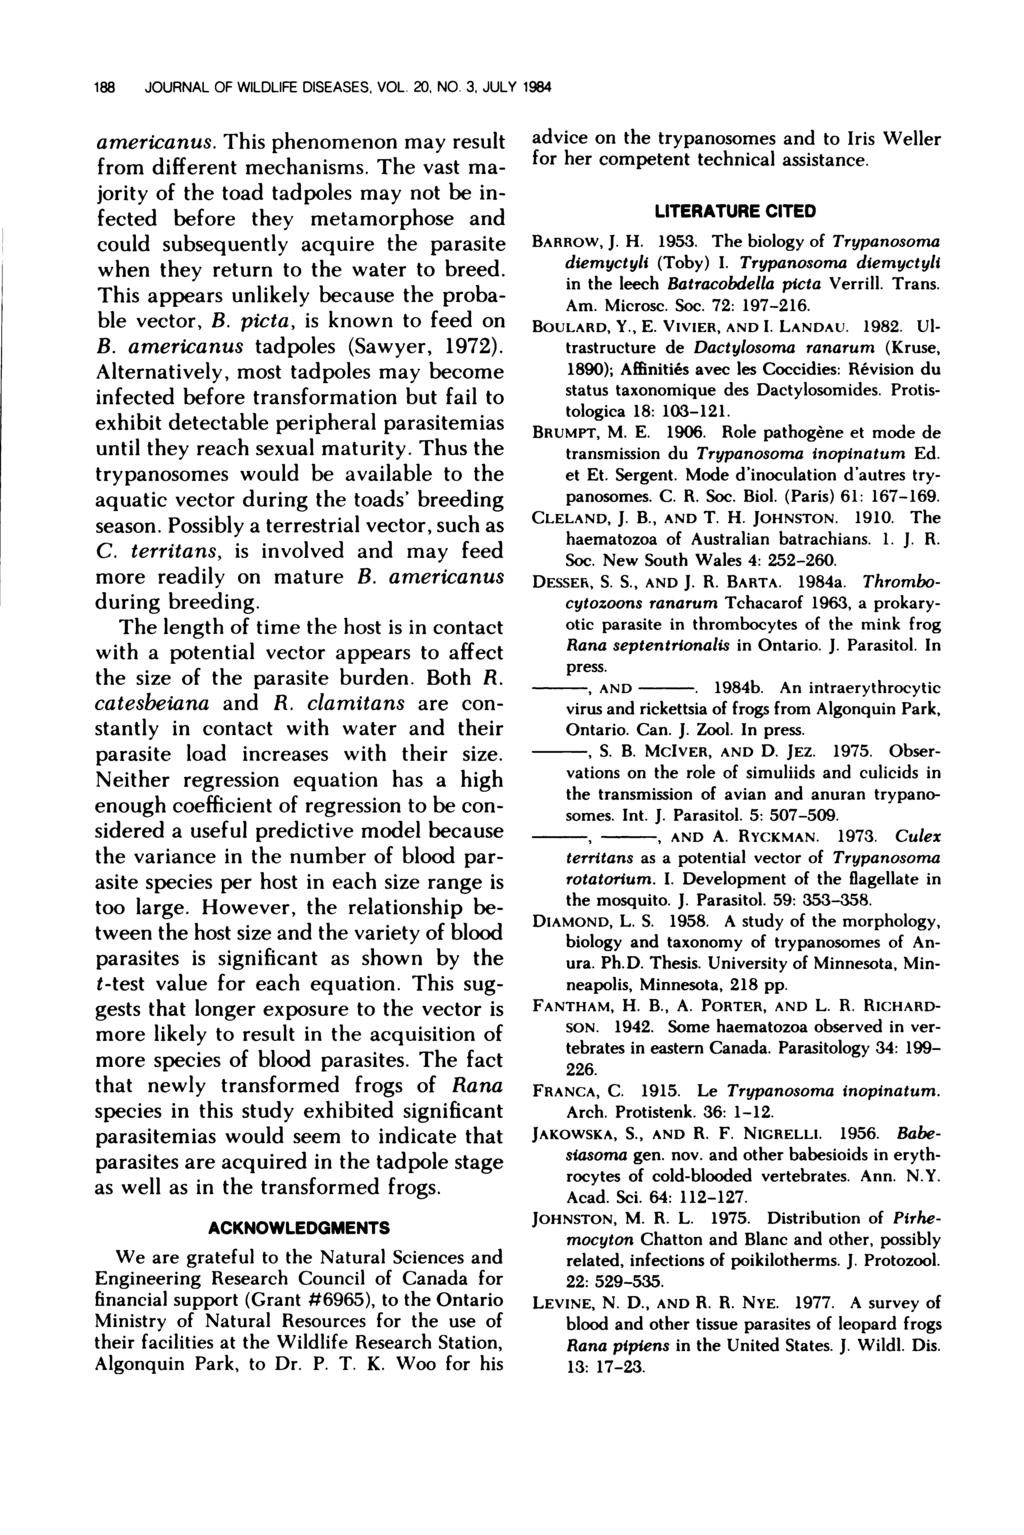 188 JOURNAL OF WILDLIFE DISEASES, VOL. 20, NO. 3, JULY 1984 amenicanus. This phenomenon may result from different mechanisms.